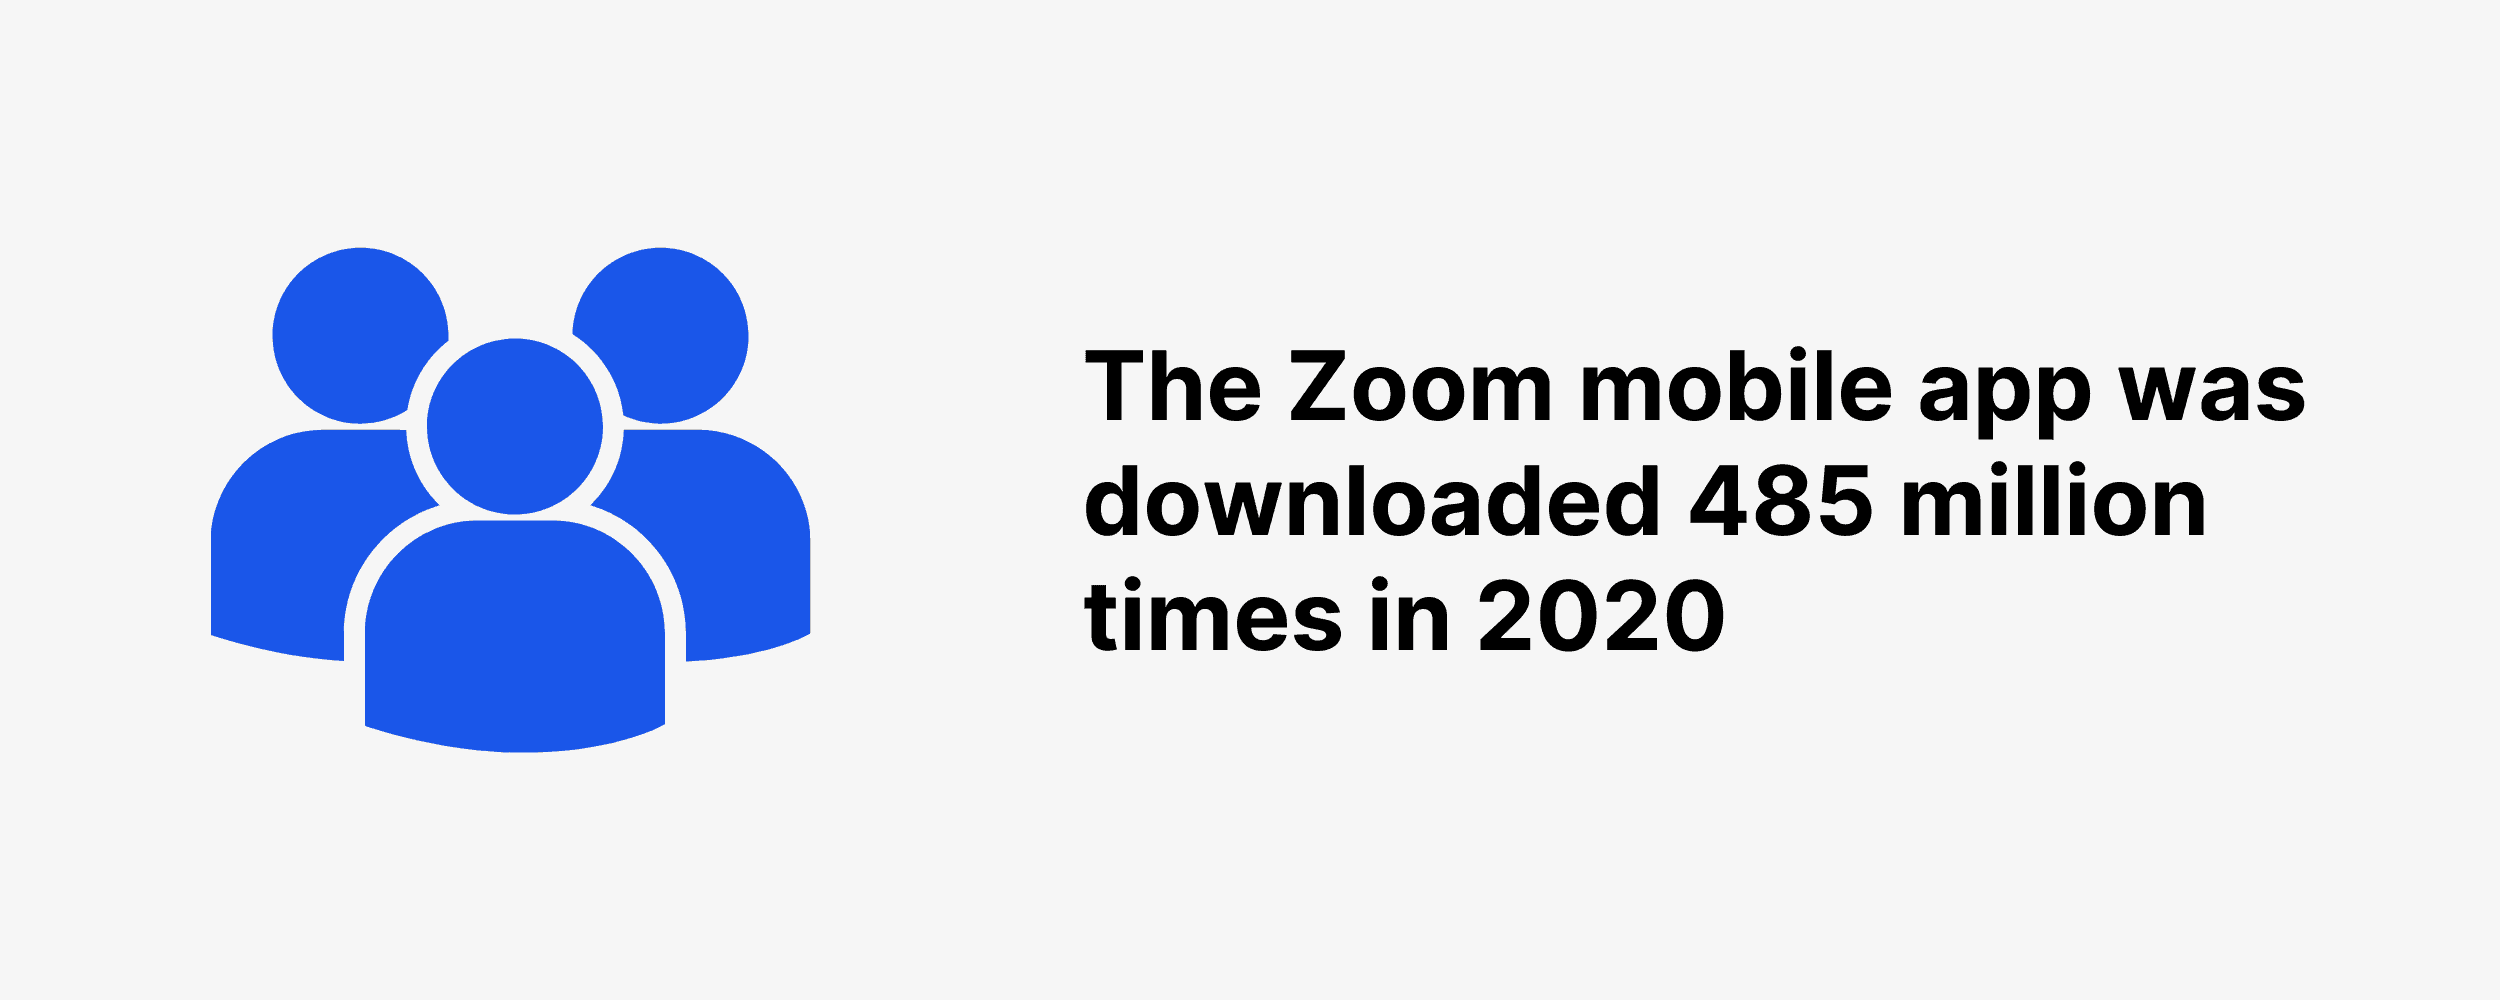 The Zoom mobile app was downloaded 485 million times in 2020